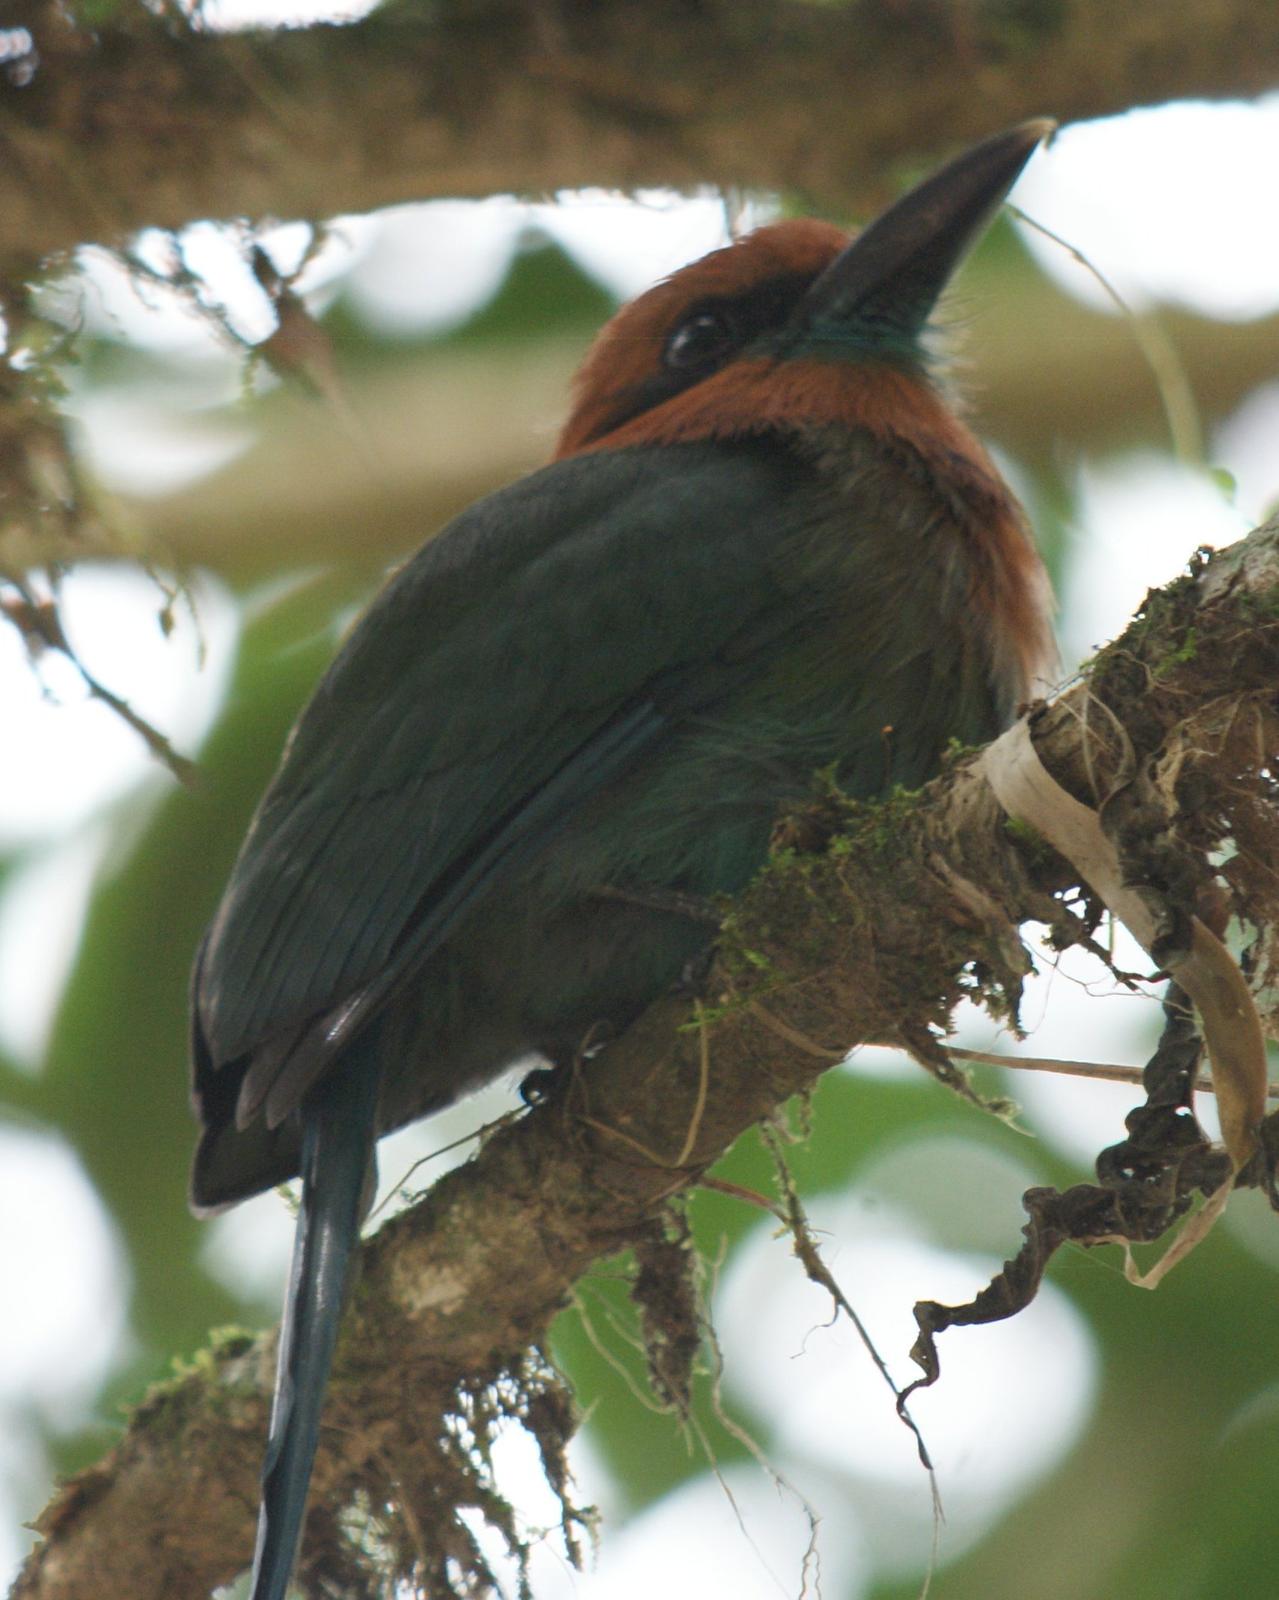 Broad-billed Motmot Photo by Robin Oxley